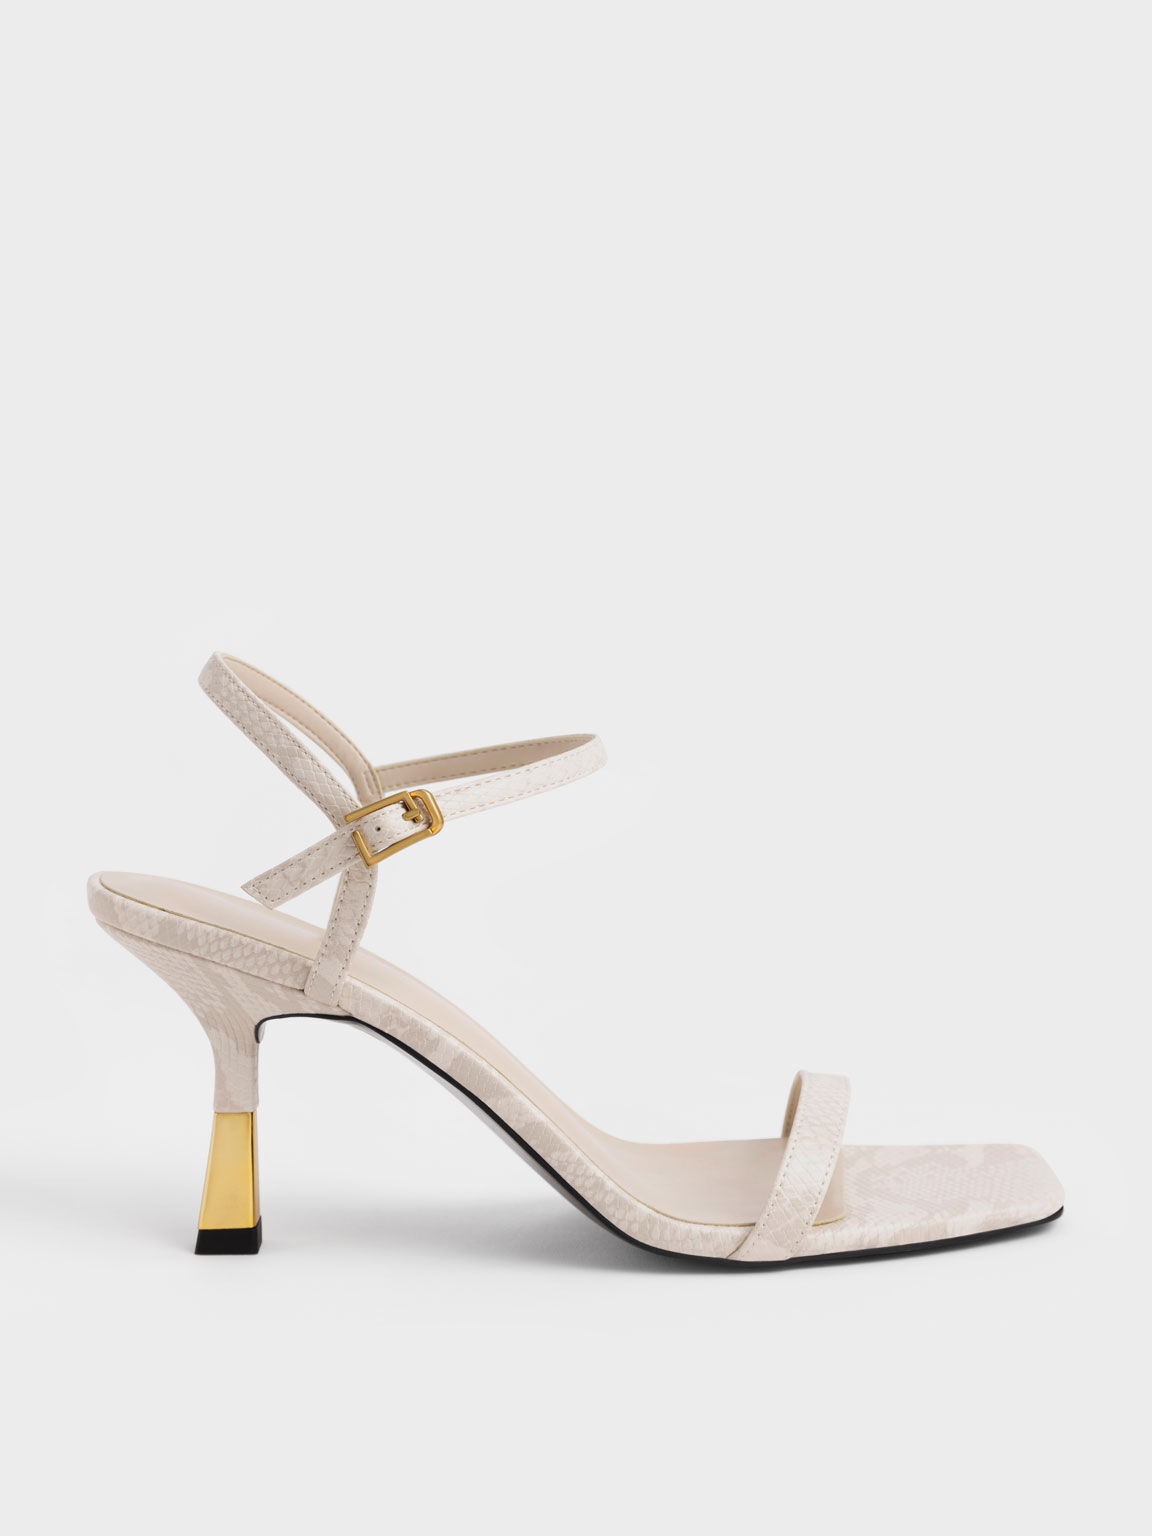 Christine Quinn's High Street Shoe Obsession Is Charles & Keith